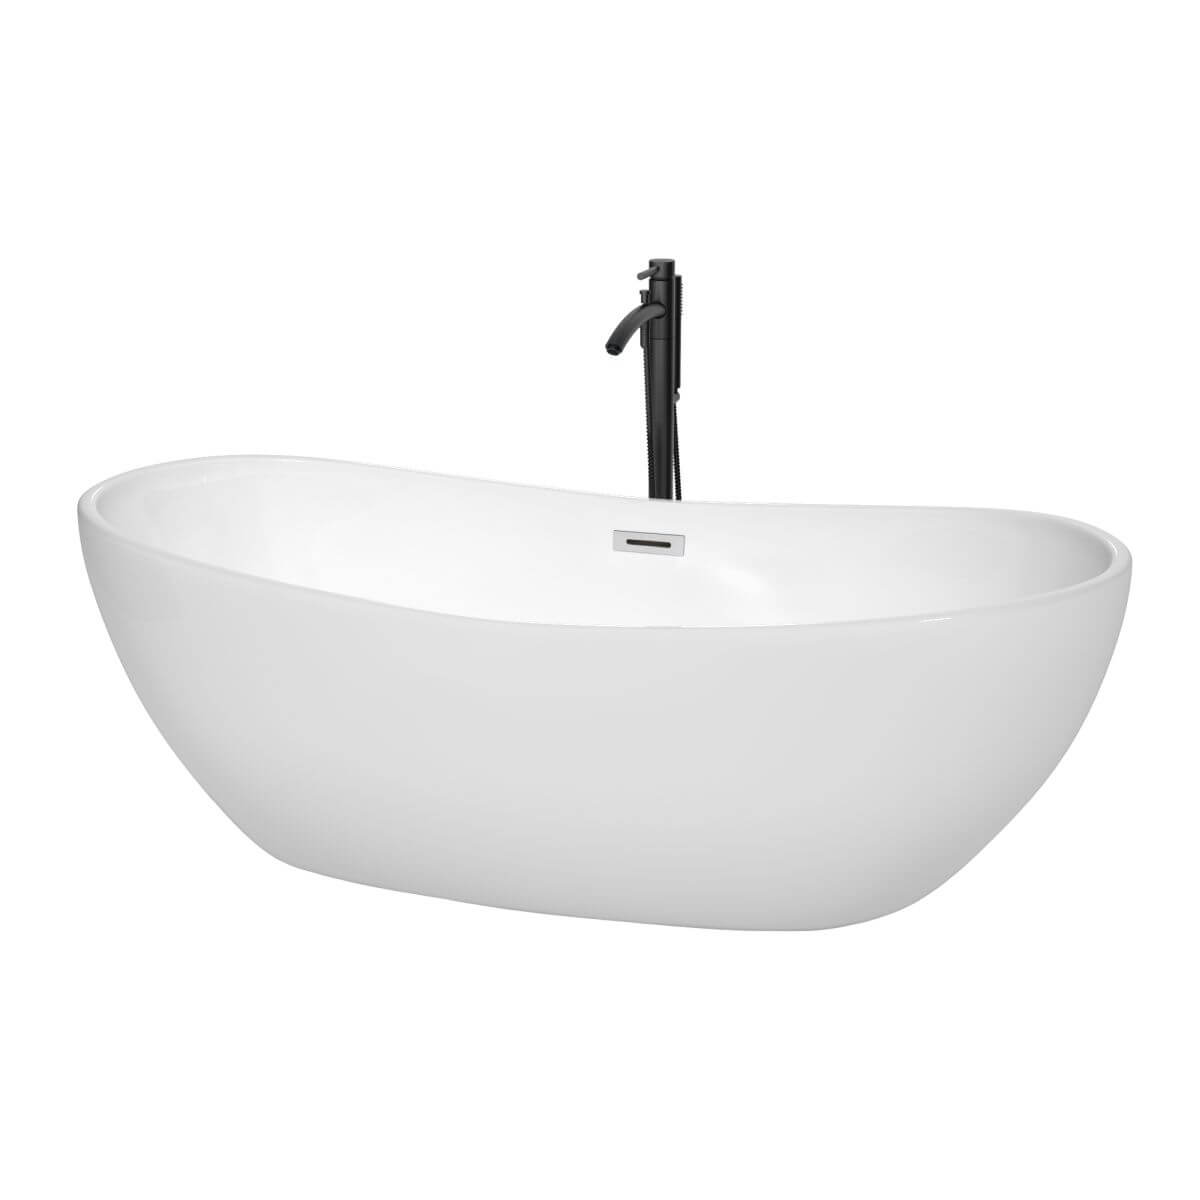 Wyndham Collection Rebecca 70 inch Freestanding Bathtub in White with Polished Chrome Trim and Floor Mounted Faucet in Matte Black - WCOBT101470PCATPBK